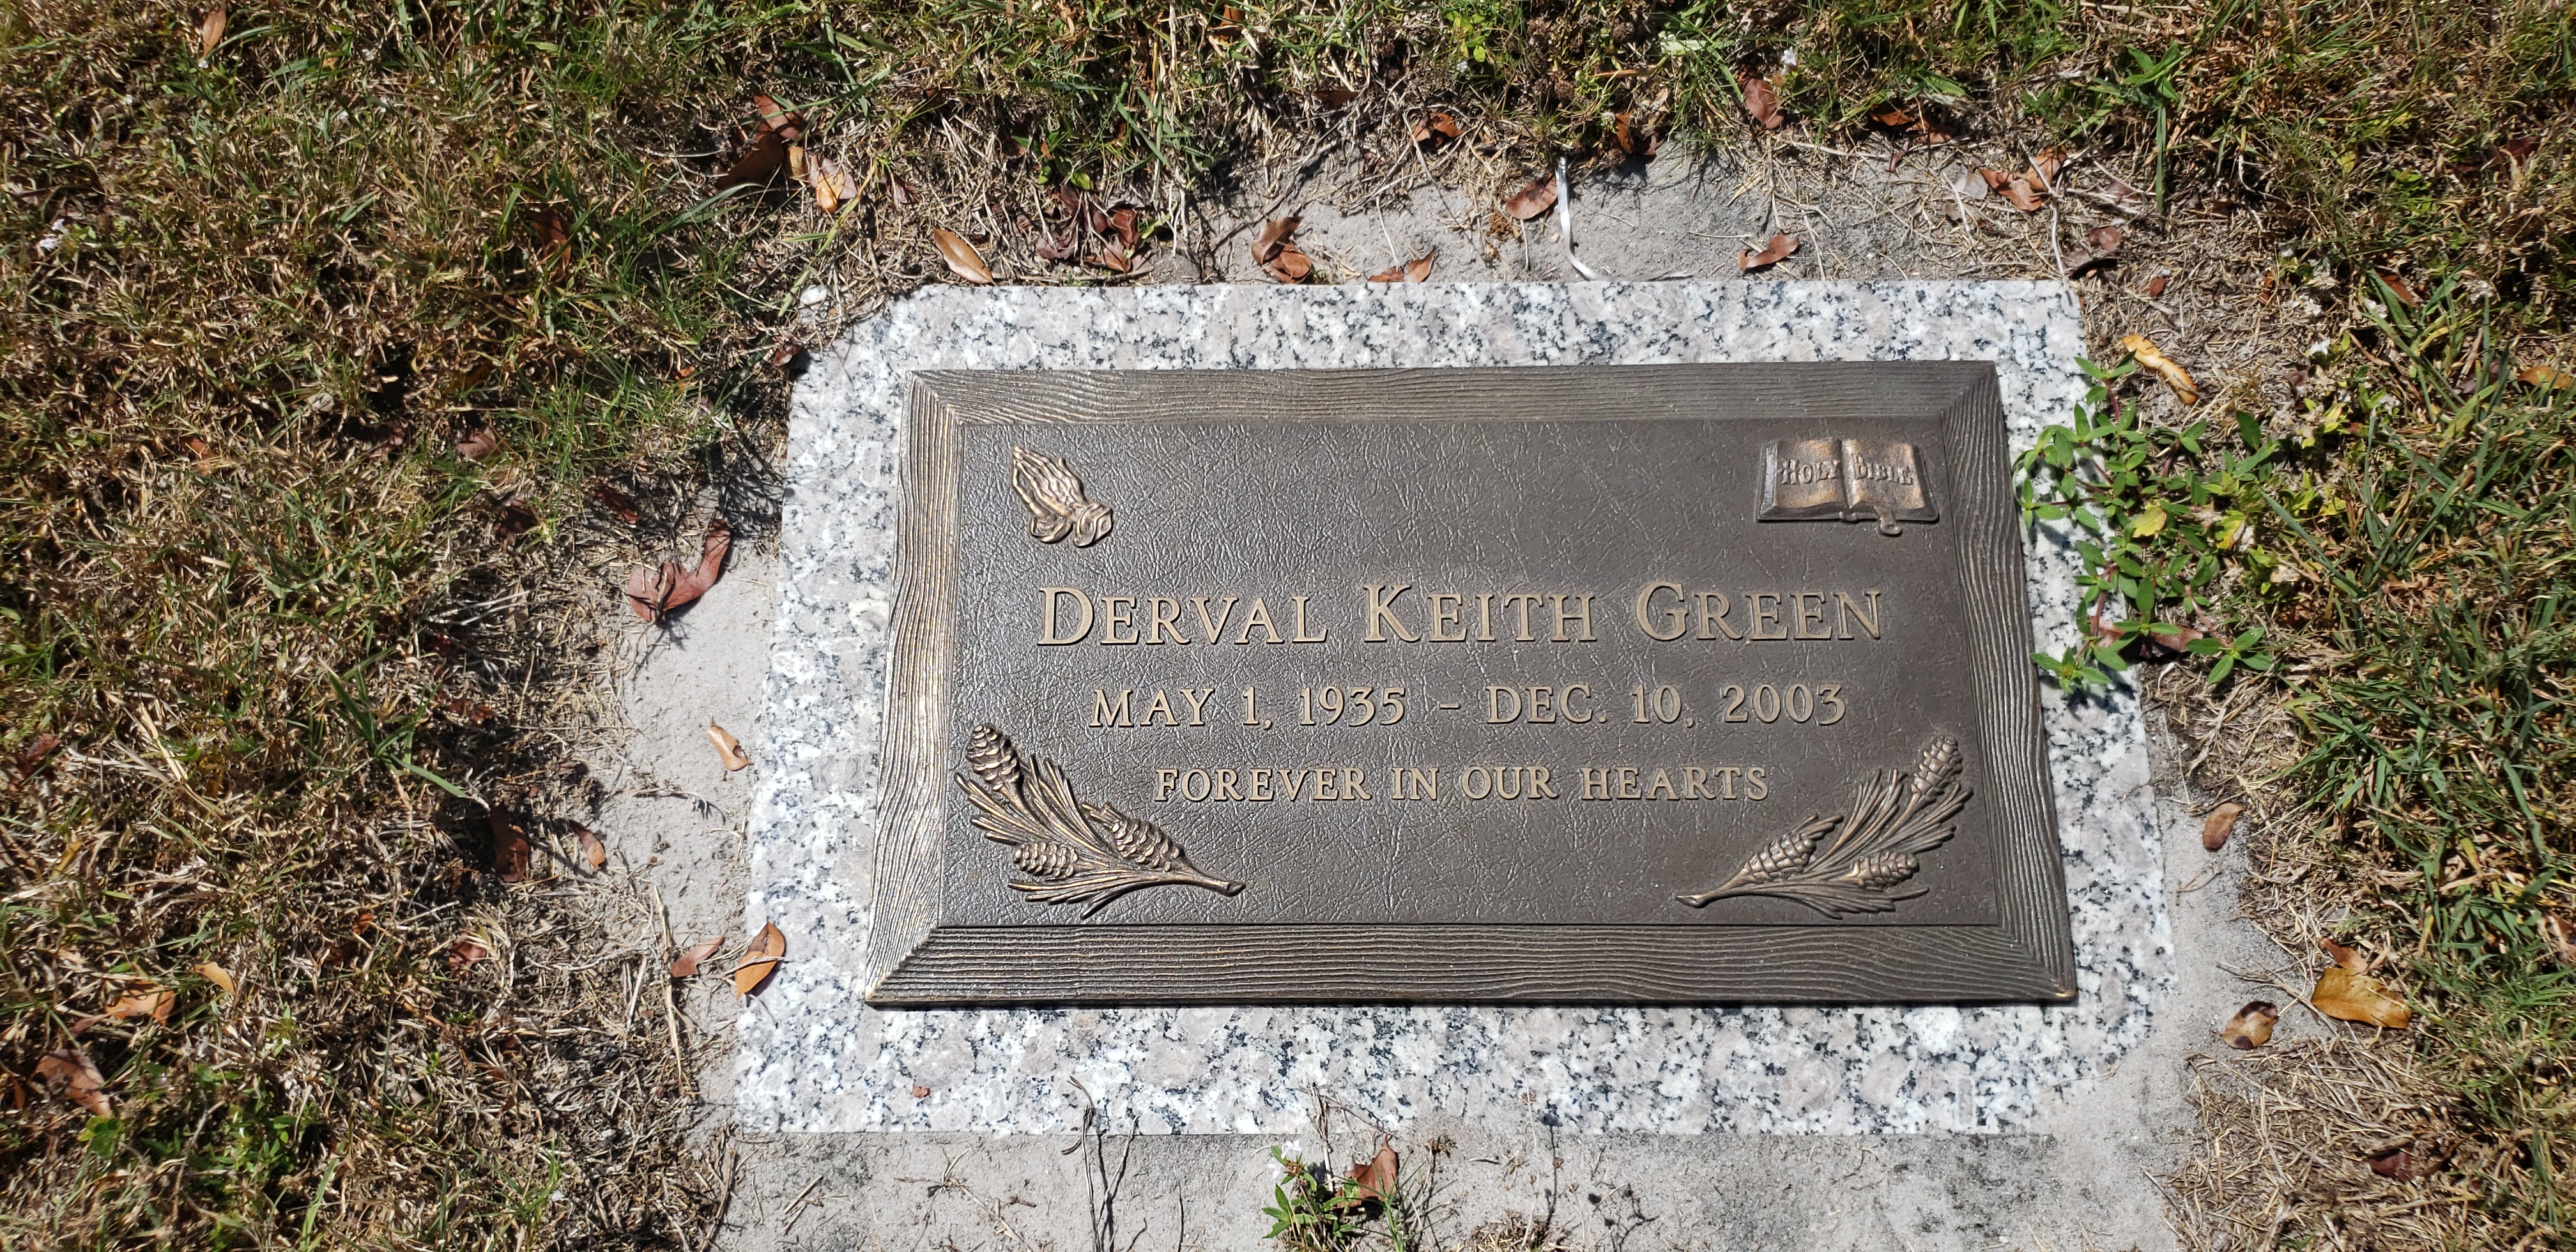 Derval Keith Green